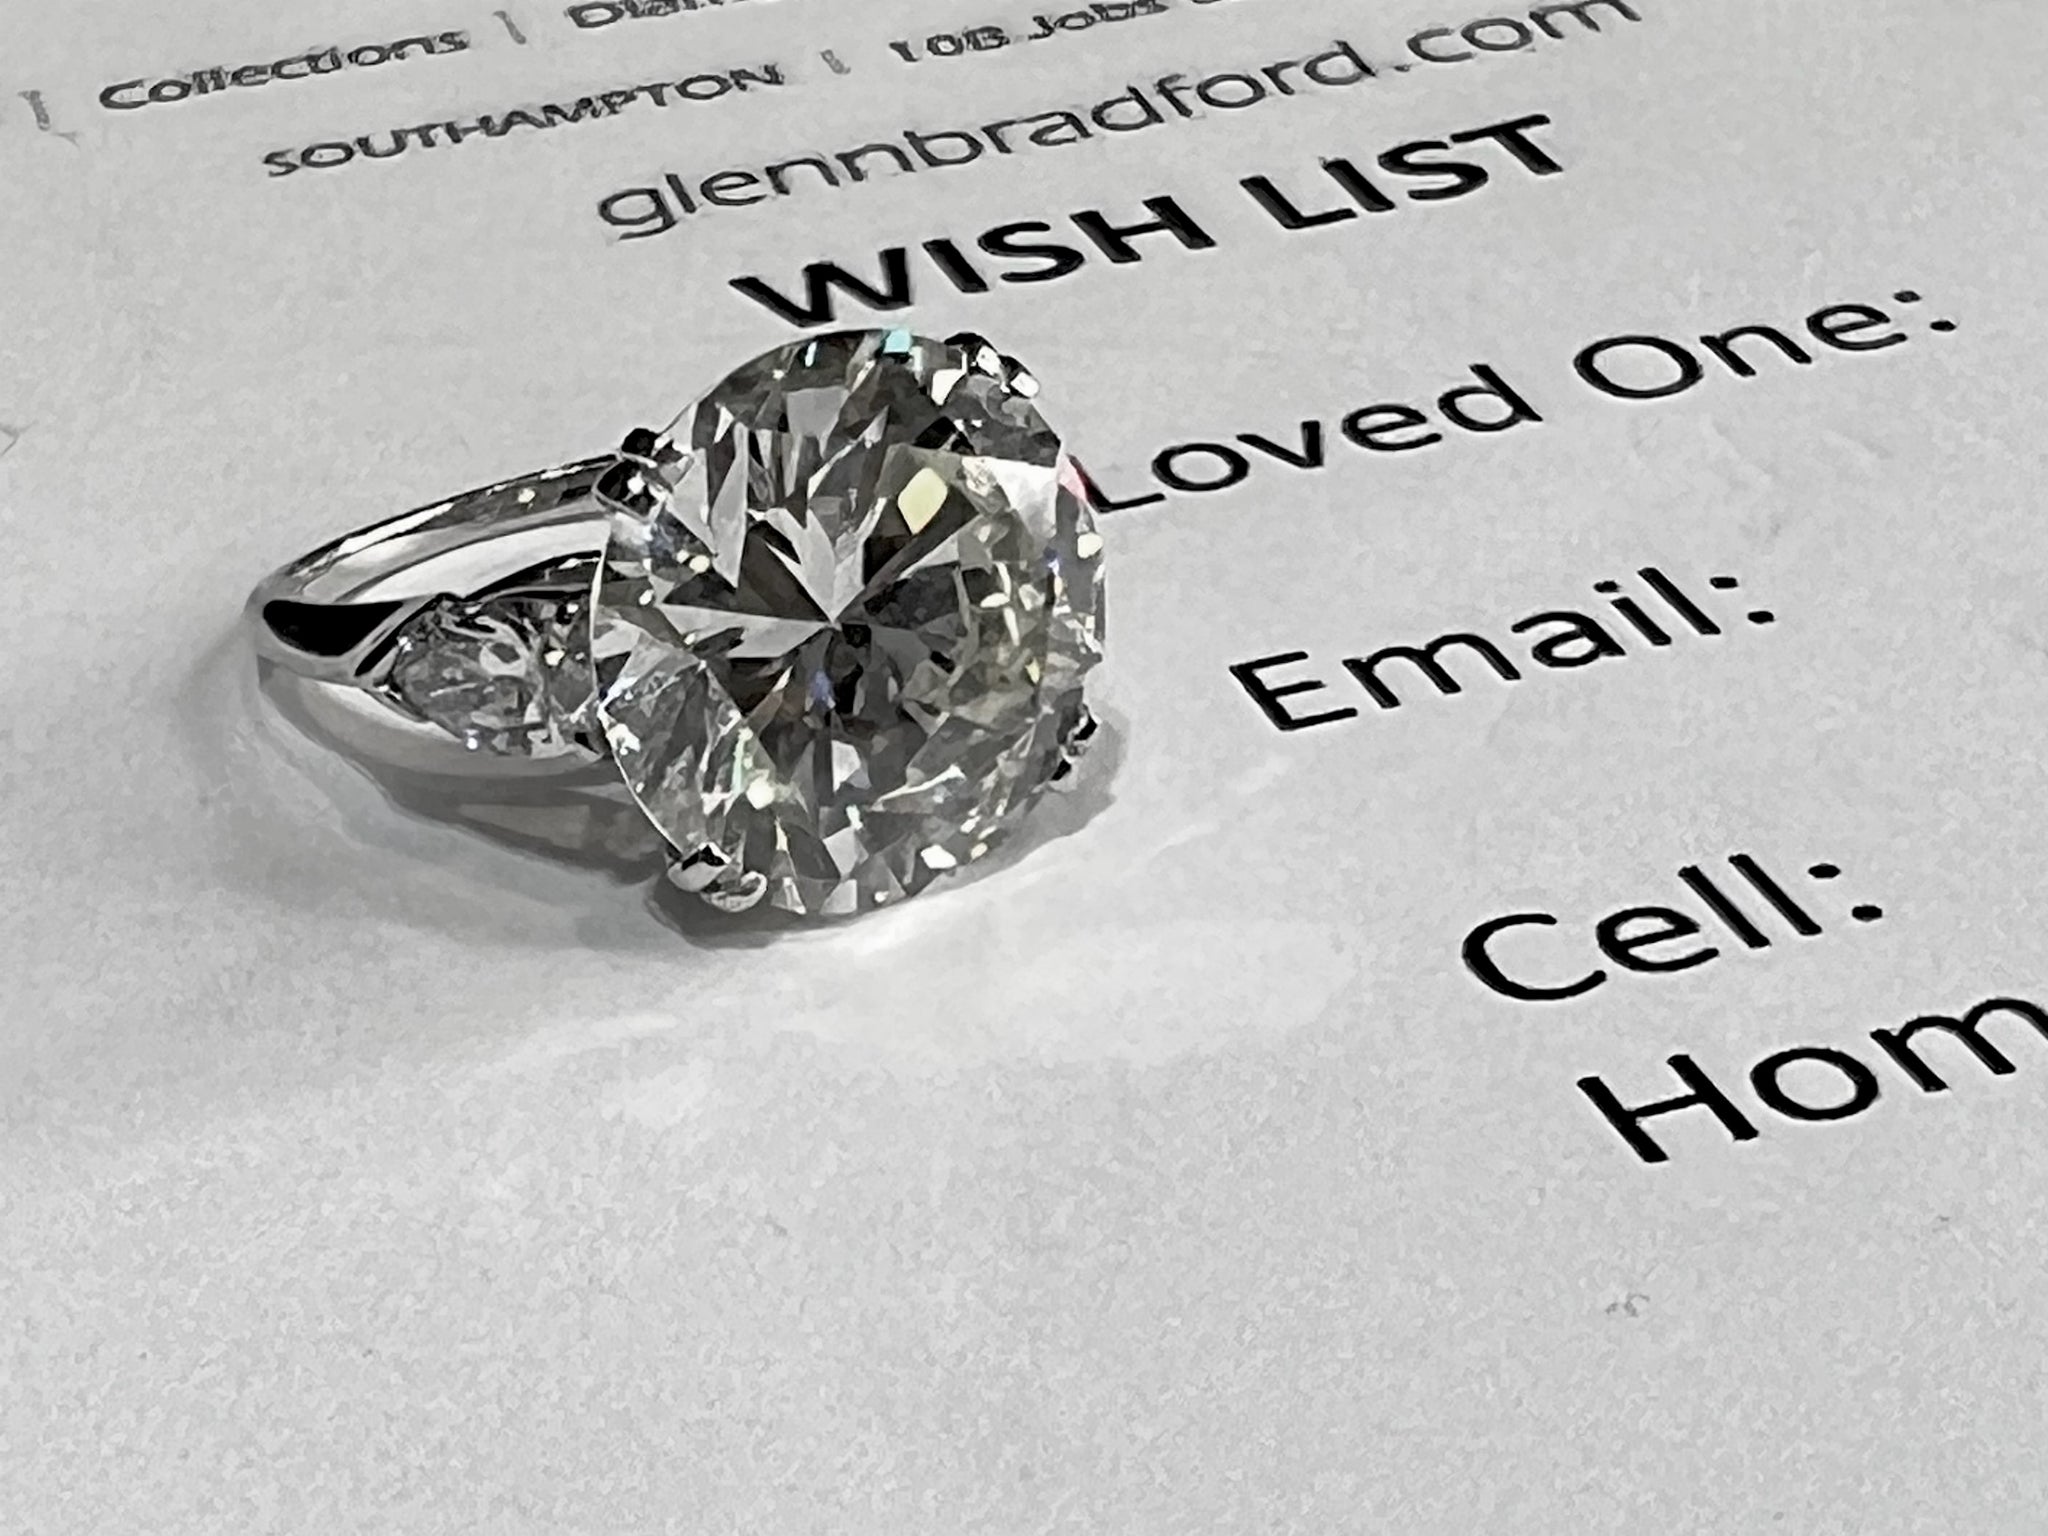 harry winston oval engagement ring